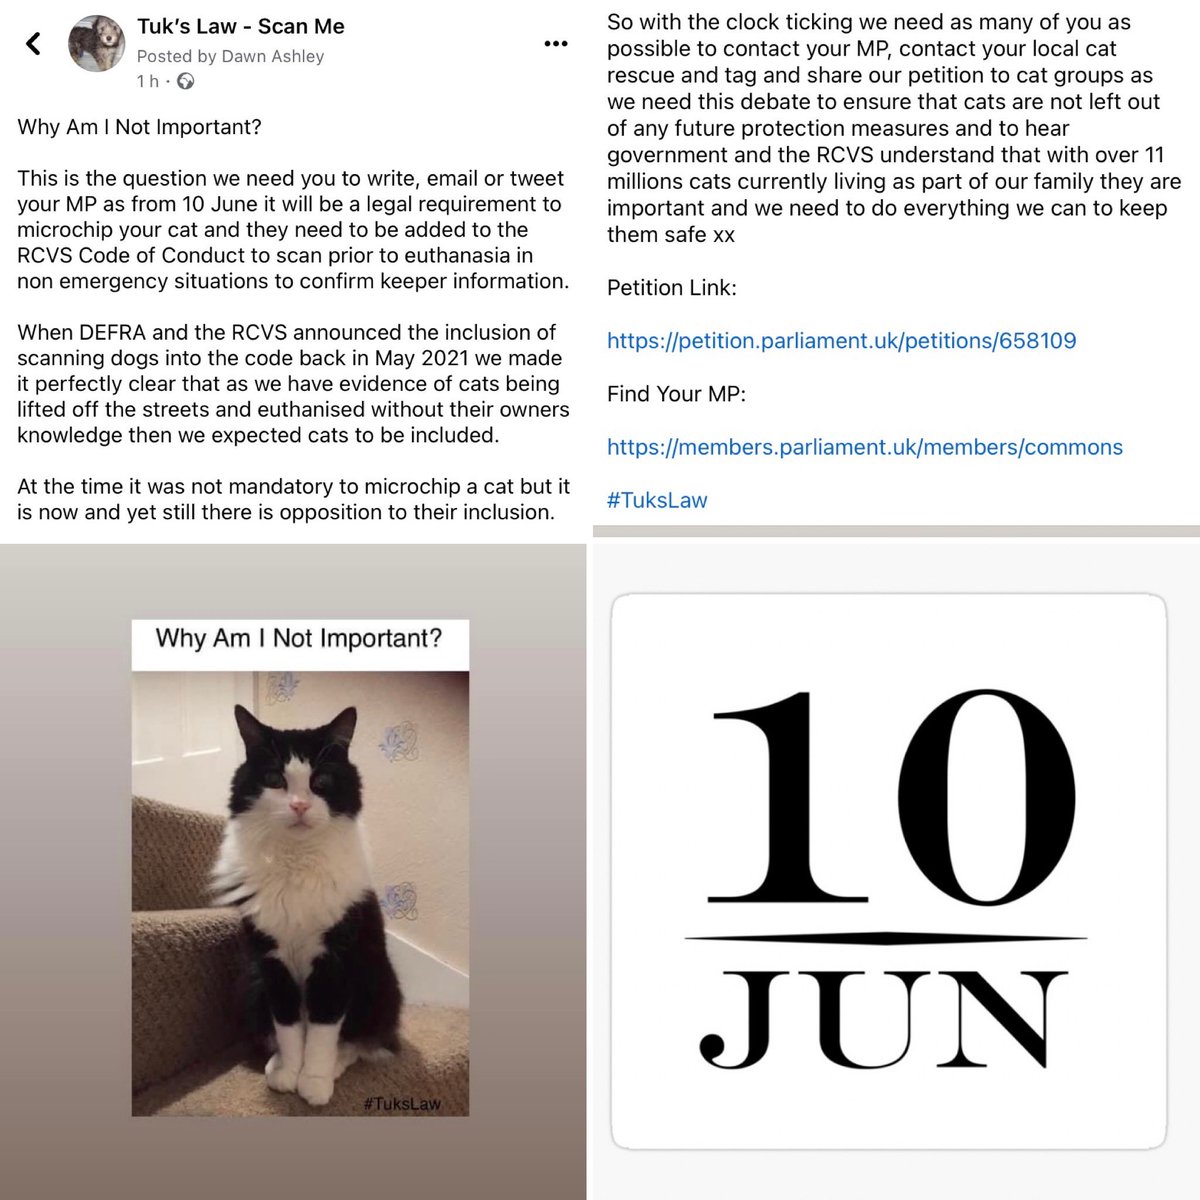 Our cats need the same rights as dogs when on 10 June microchipping our cats becomes law. 

Currently there are no plans to include them in the @theRCVS Code of Conduct. Why??

Retweet your MP, send an email and please support our campaign.

petition.parliament.uk/petitions/6581…

@CPMediaTeam